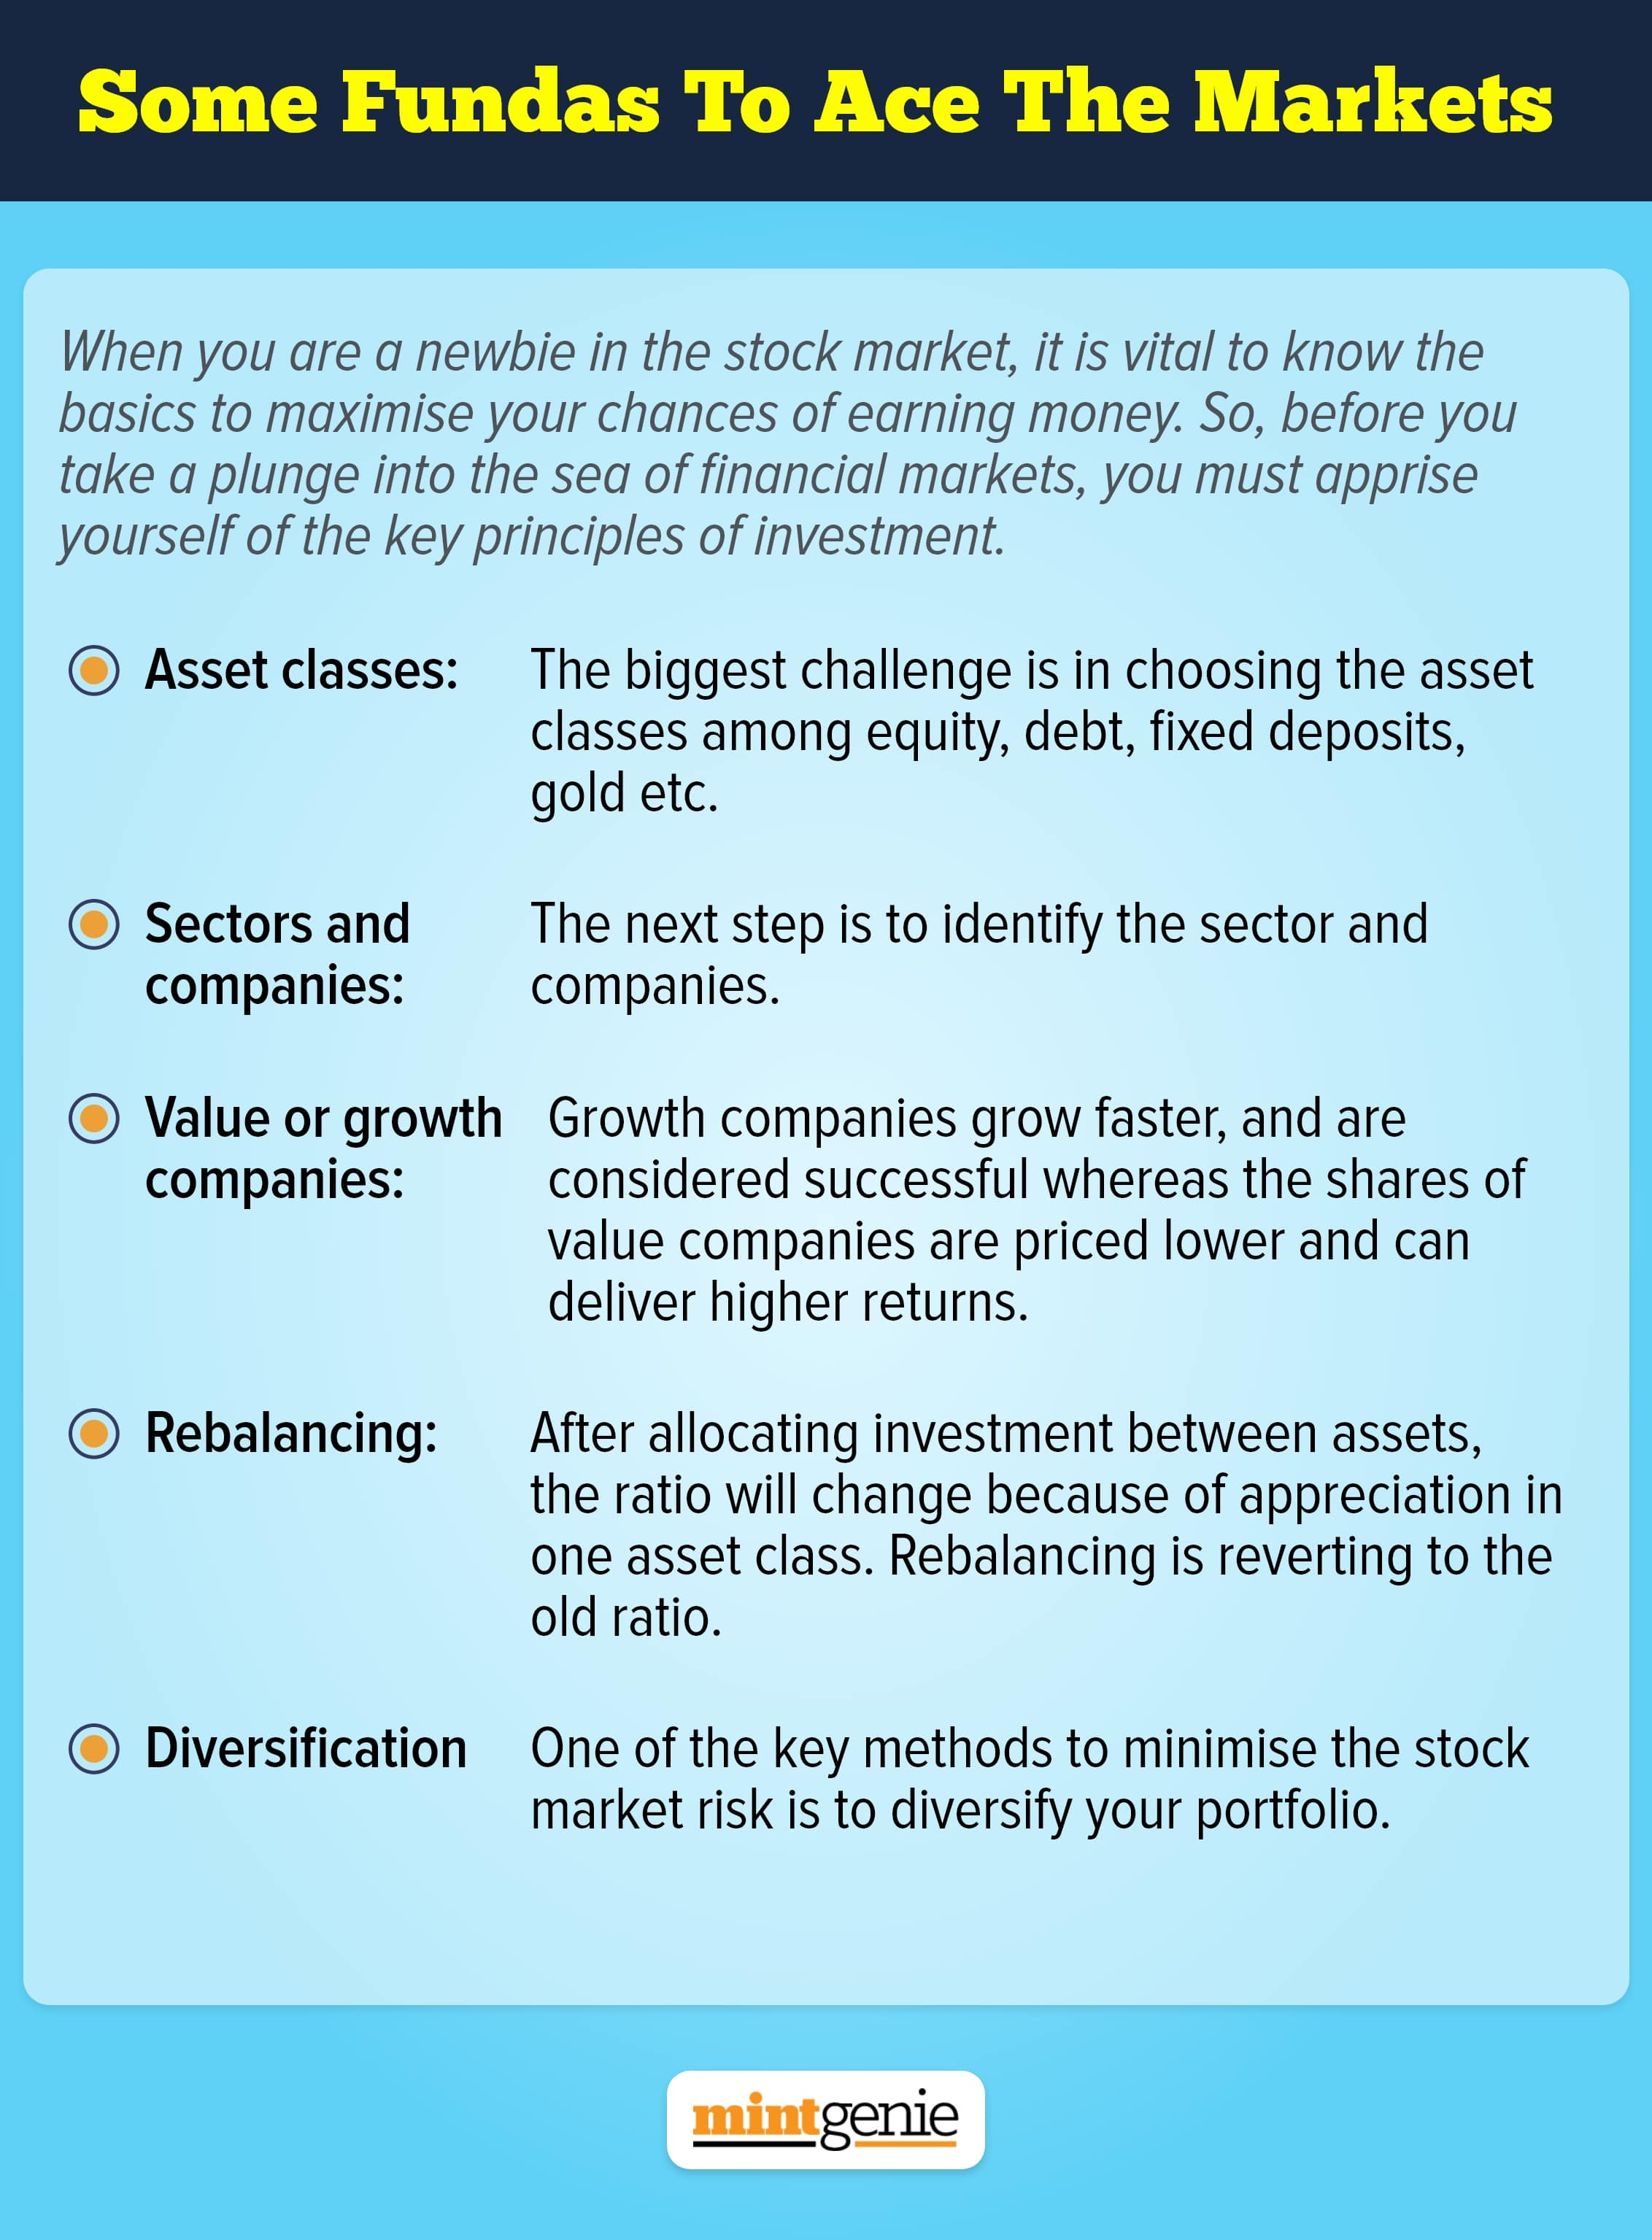 Some fundamentals to dominate the markets.